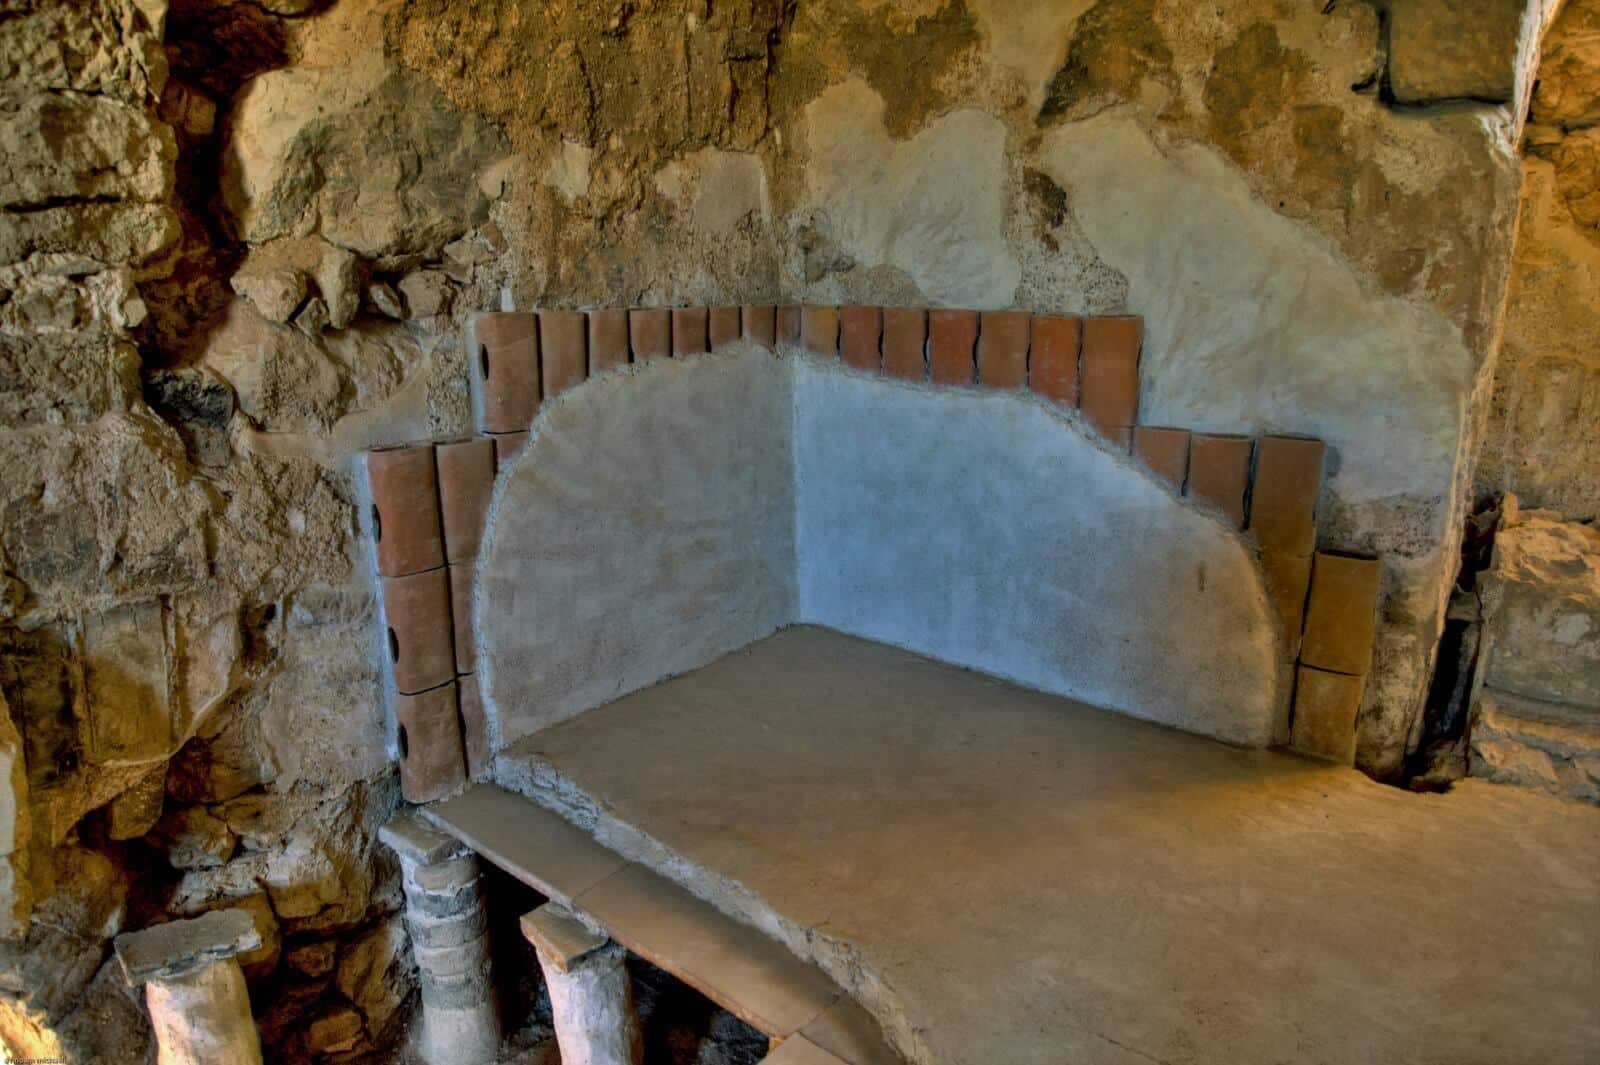 The hot room of the first century BCE bath in the palace of King Herod at Masada. Note the suspended floor as it rests on the pillars of the hypocaust system and pipes (tubuli) that circulate the hot air behind the walls. Courtesy of Guy Shtibel.